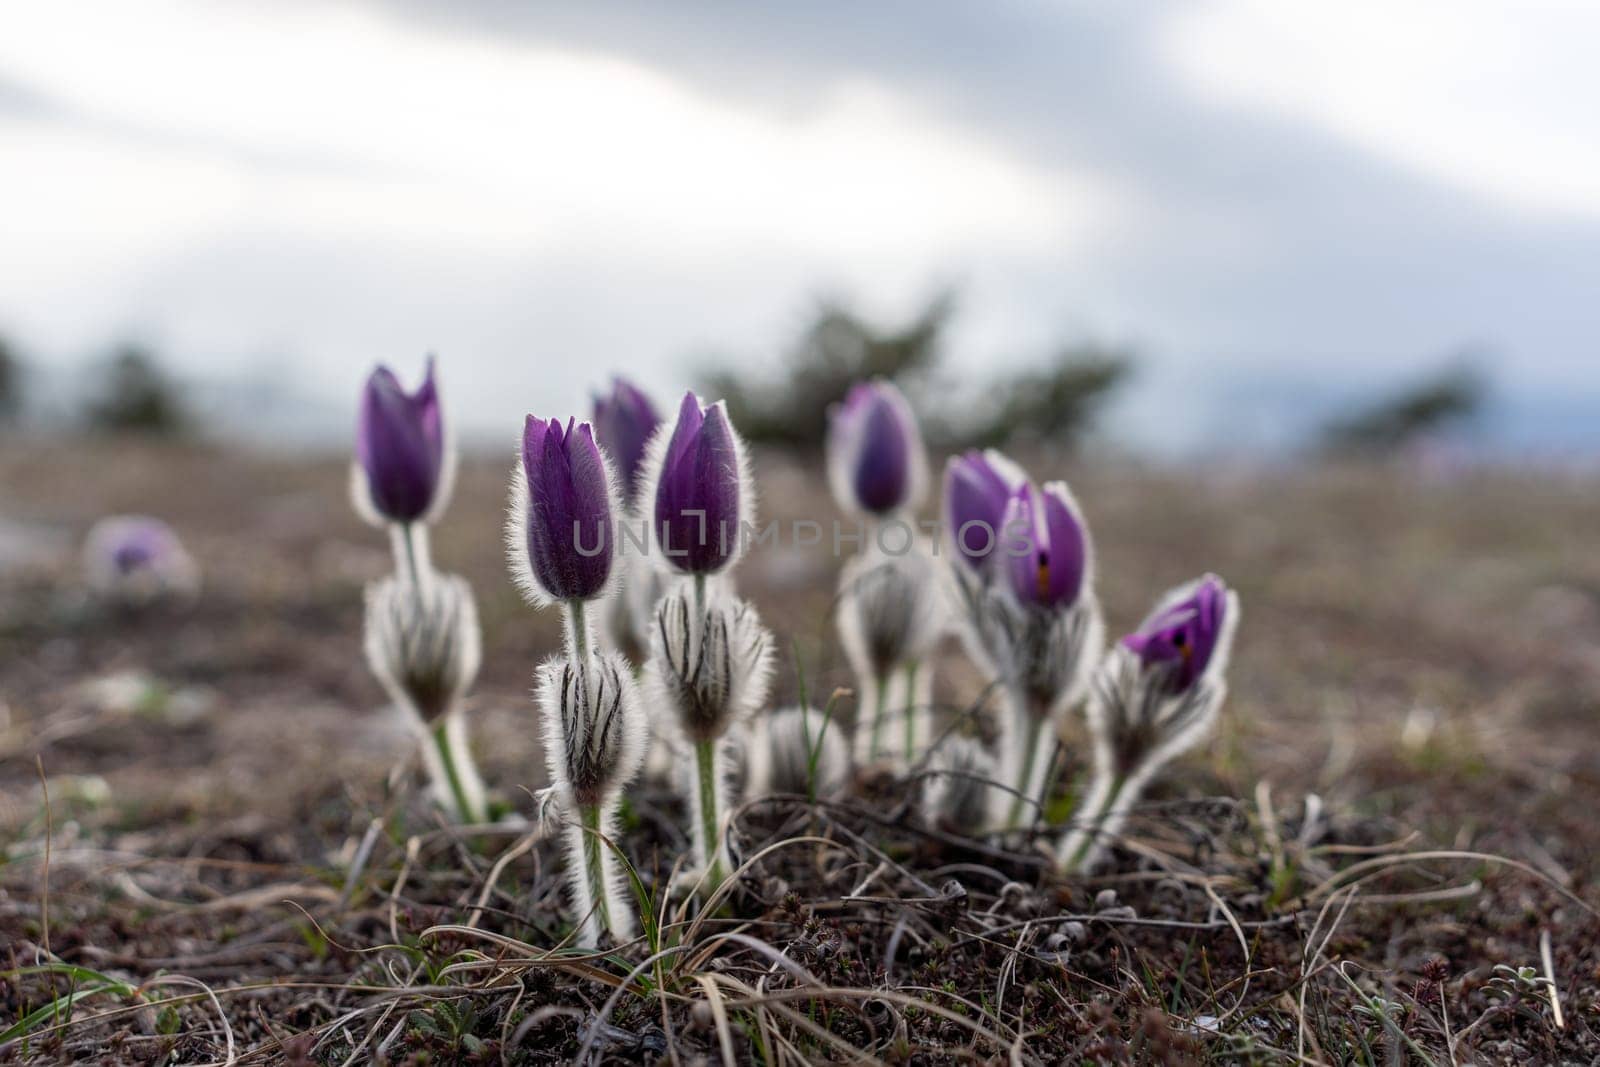 Dream grass spring flower. Pulsatilla blooms in early spring in forests and mountains. Purple pulsatilla flowers close up in the snow by Matiunina